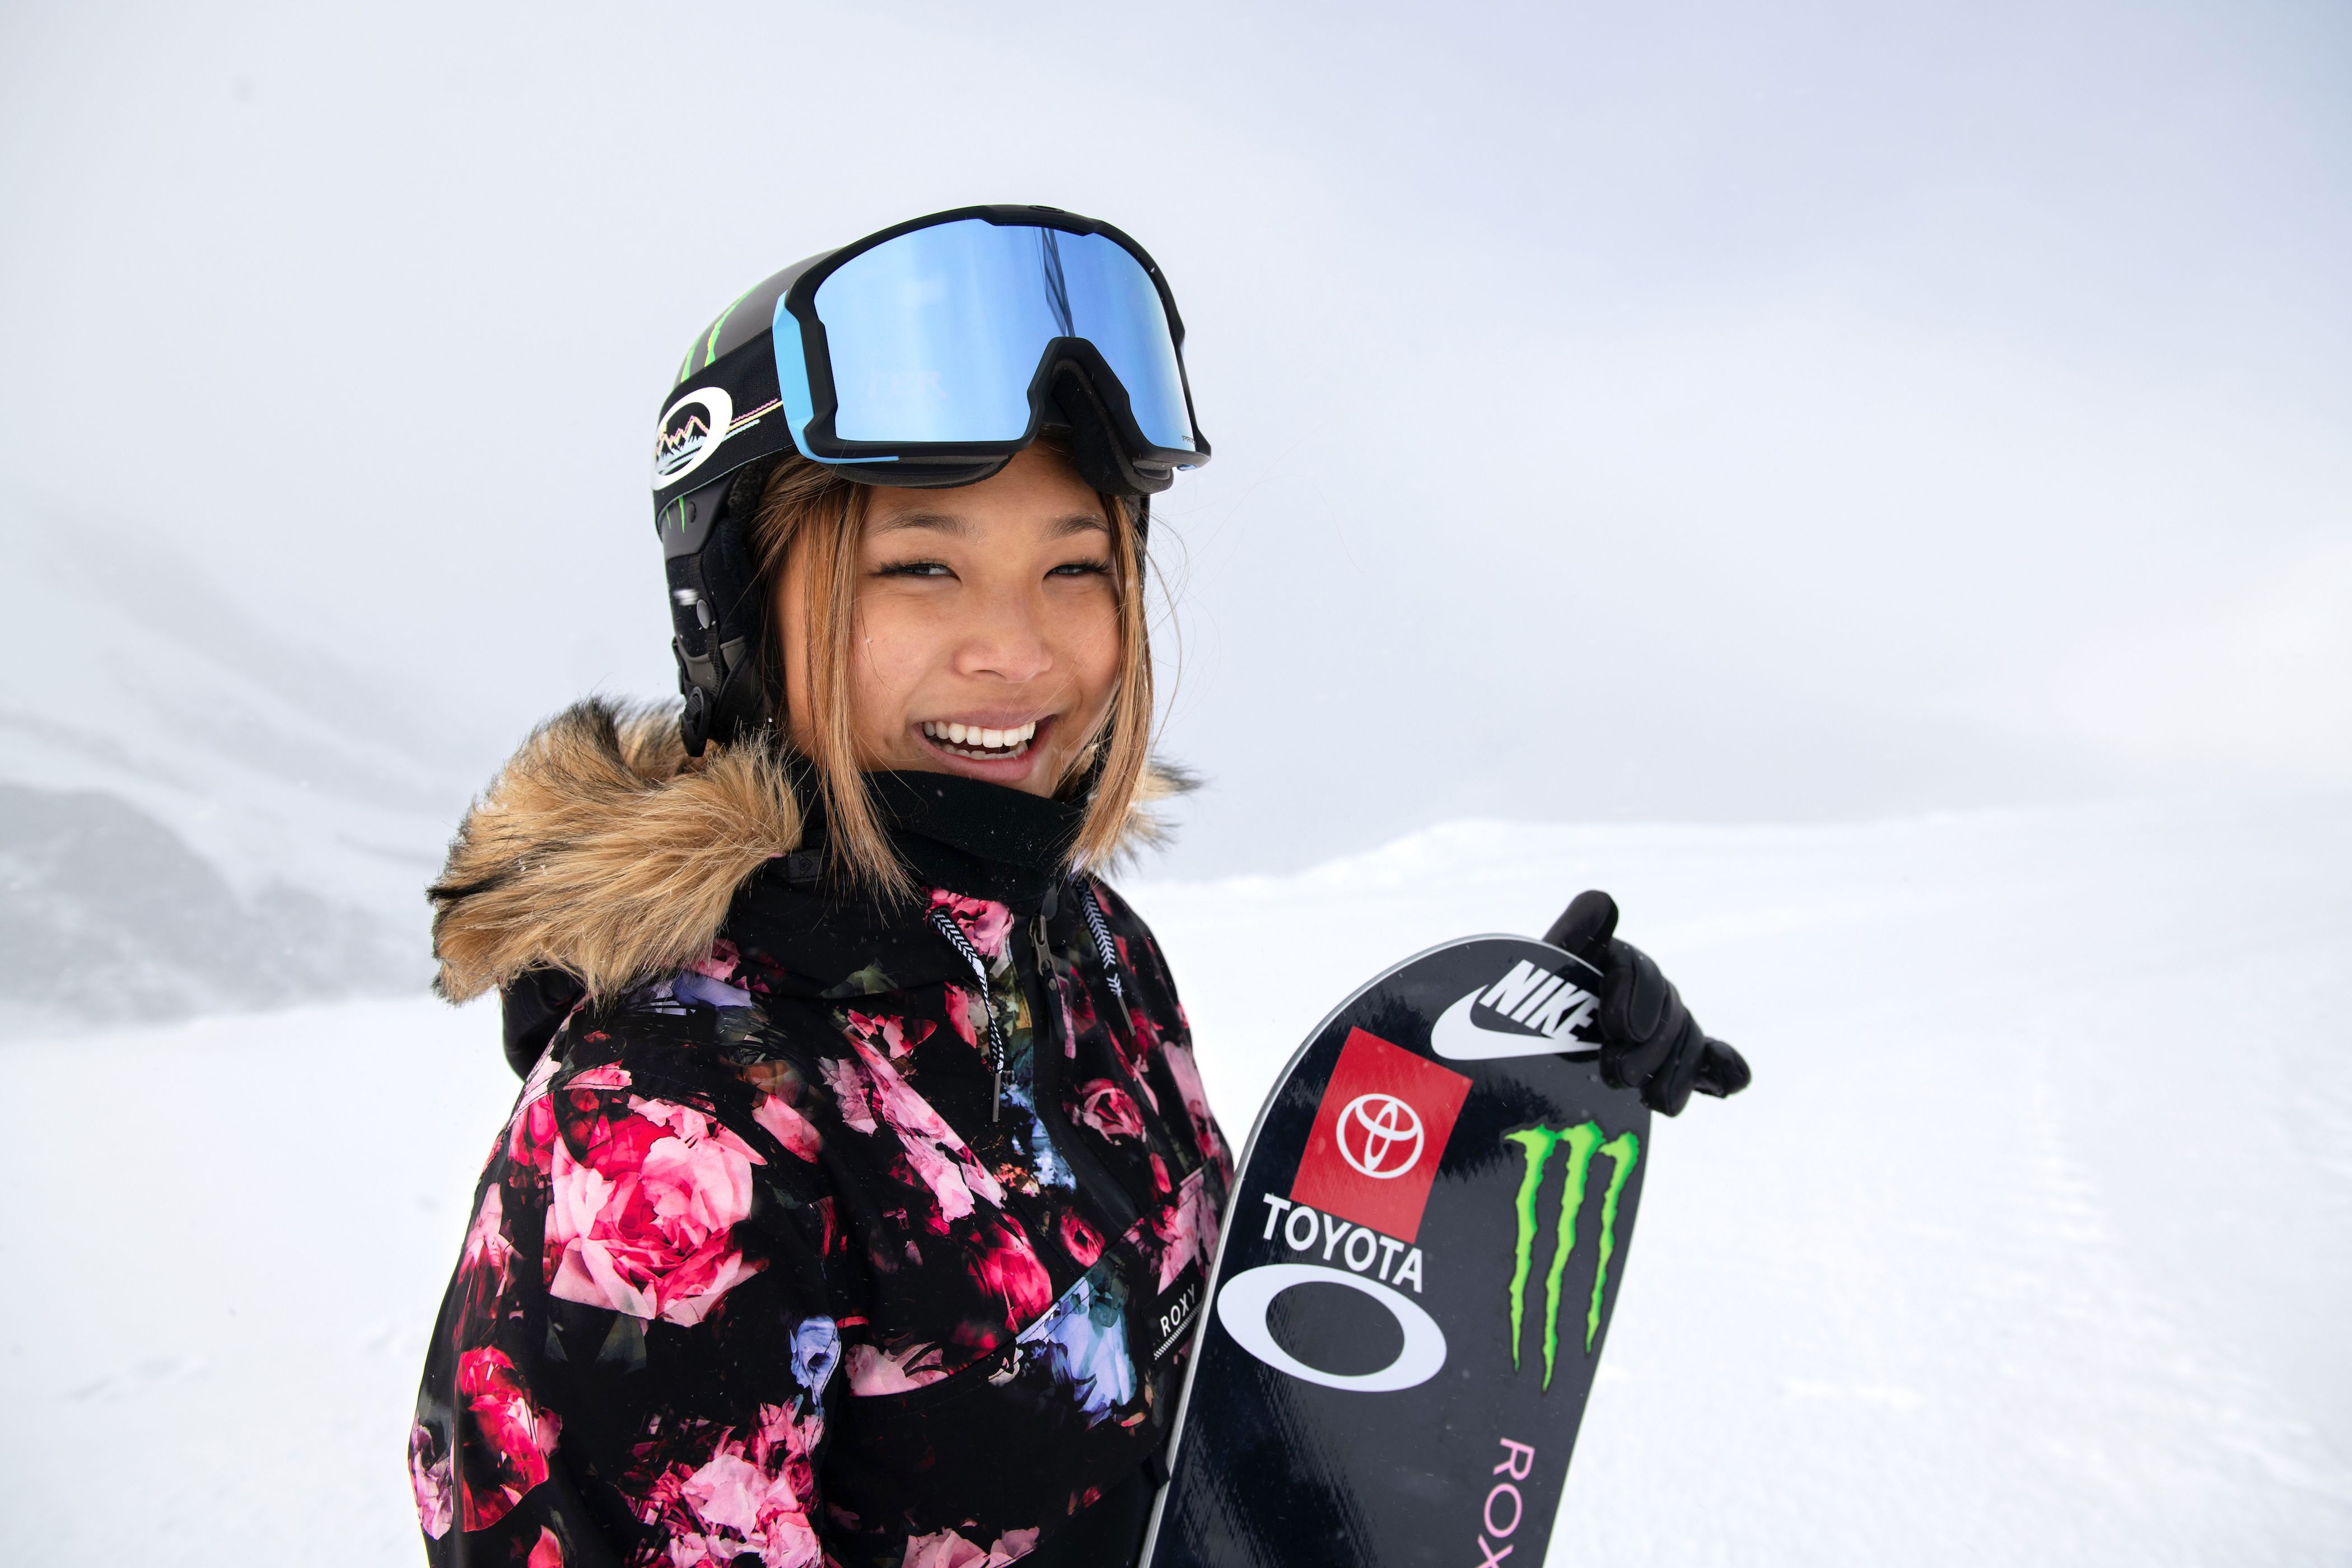 Snowboarder Chloe Kim standing on a snow covered hill holding her snowboard up smiling for the camera.